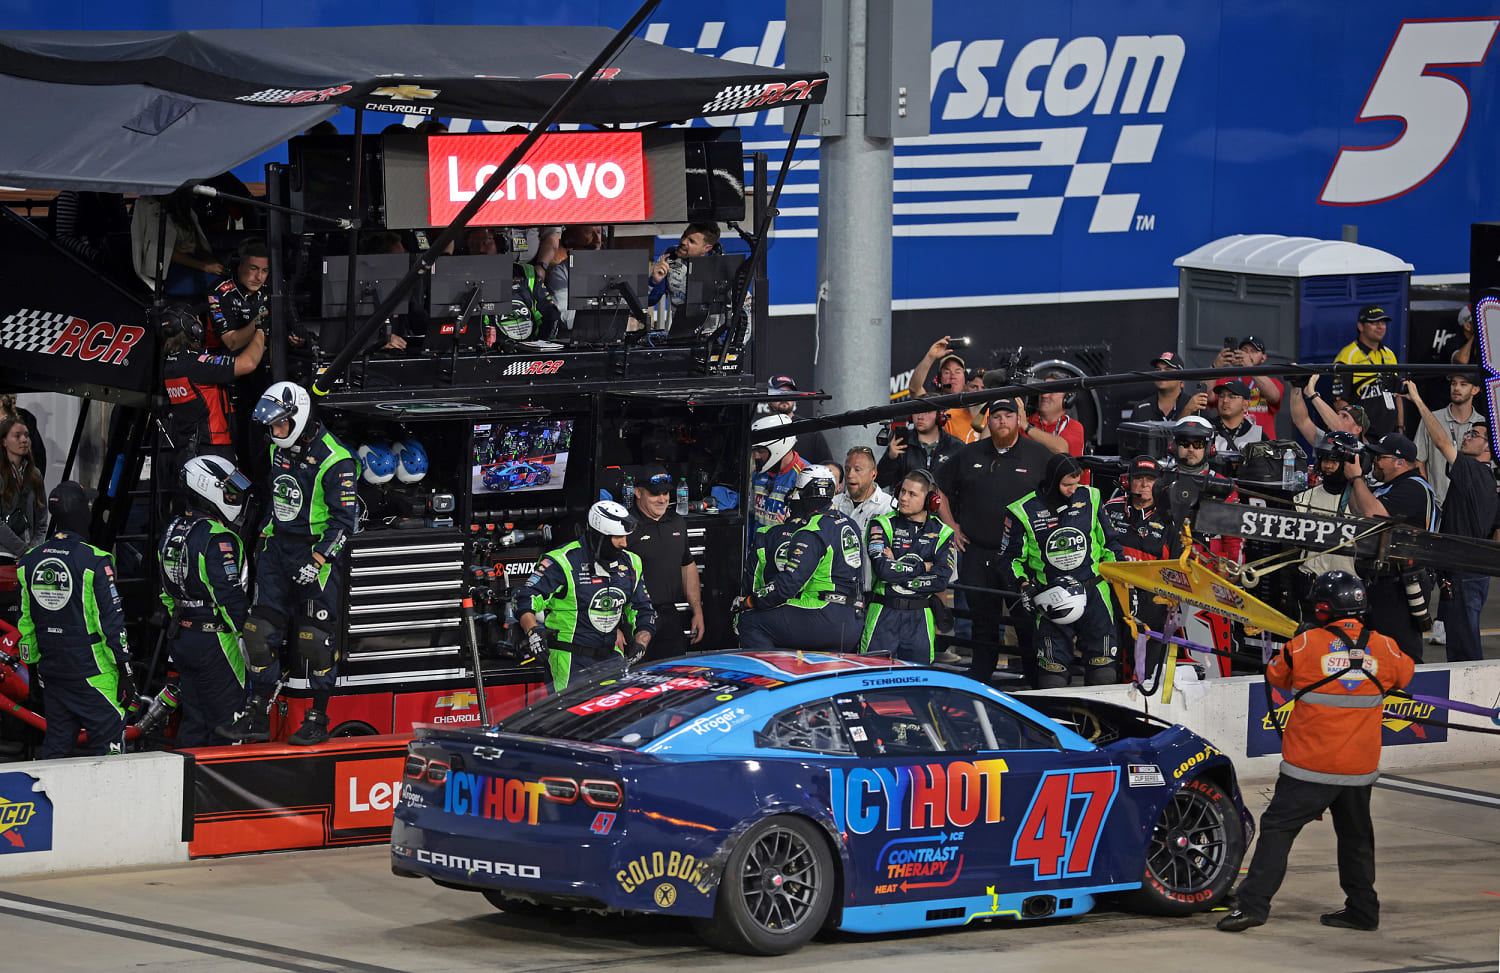 Fight breaks out between NASCAR drivers Ricky Stenhouse Jr. and Kyle Busch at All-Star Race